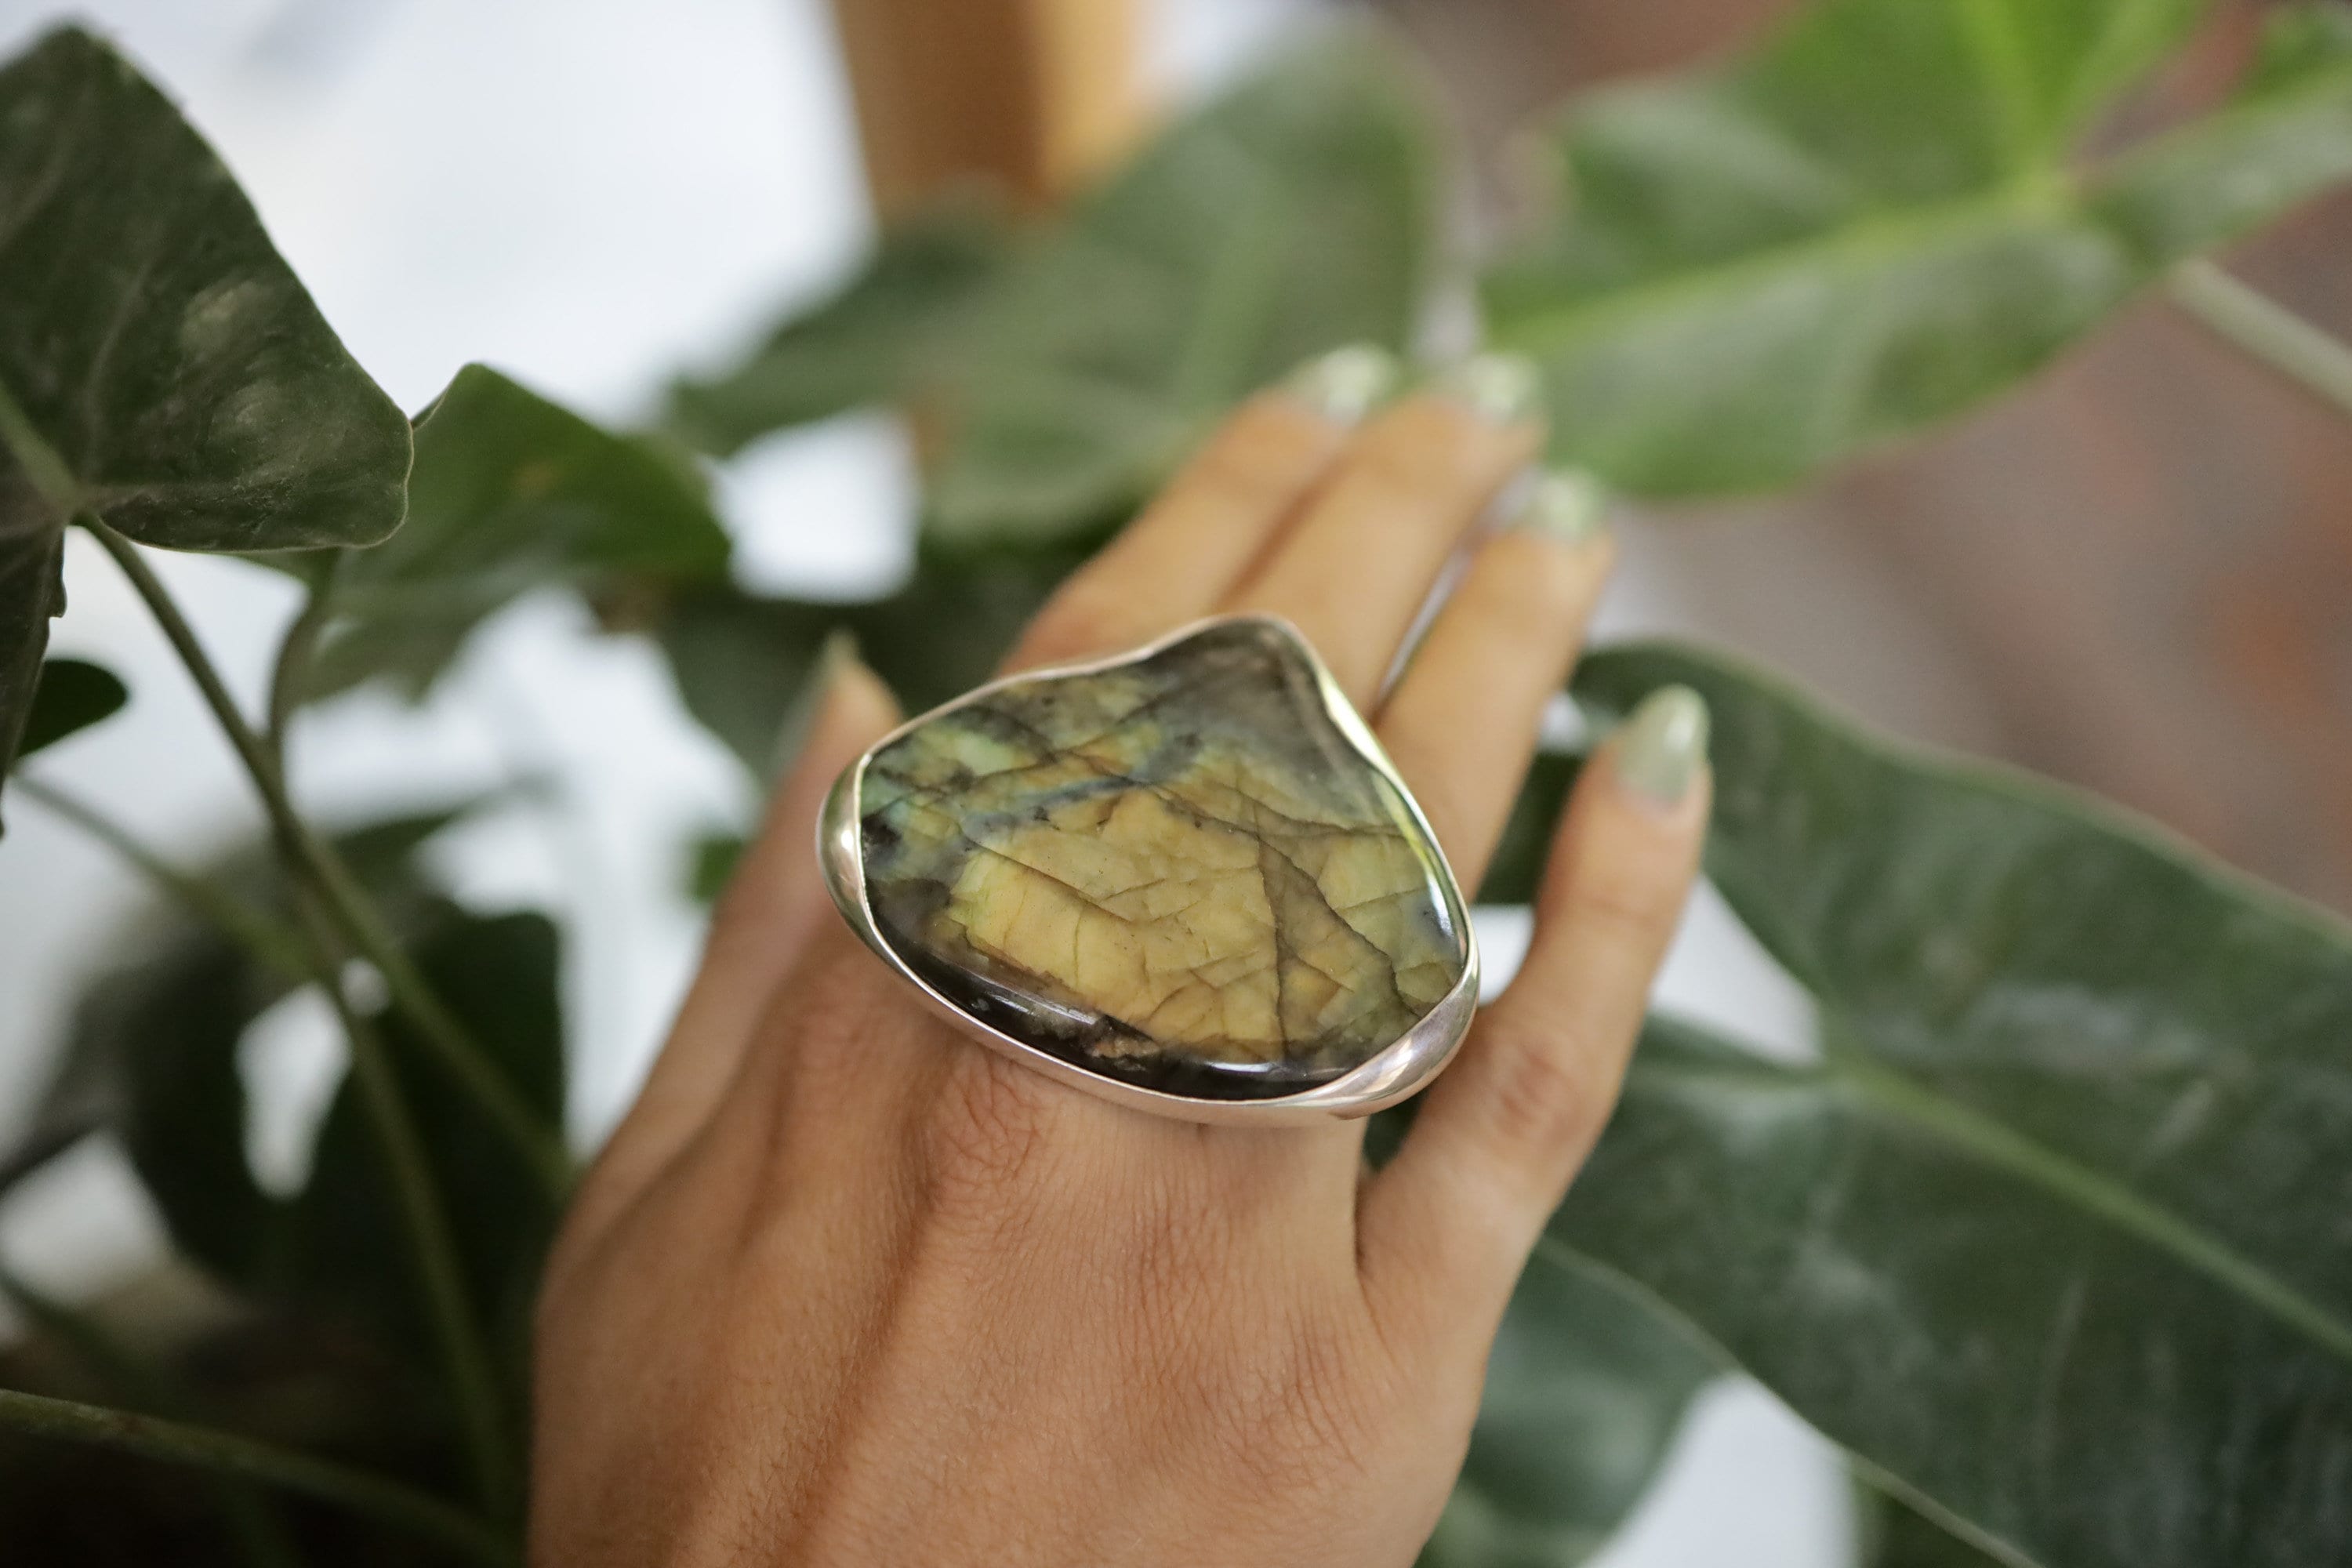 A Sturdy Embrace of Mystical Reflections: Adjustable Sterling Silver Ring with Teardrop Labradorite - Unisex - Size 5-12 US - NO/02